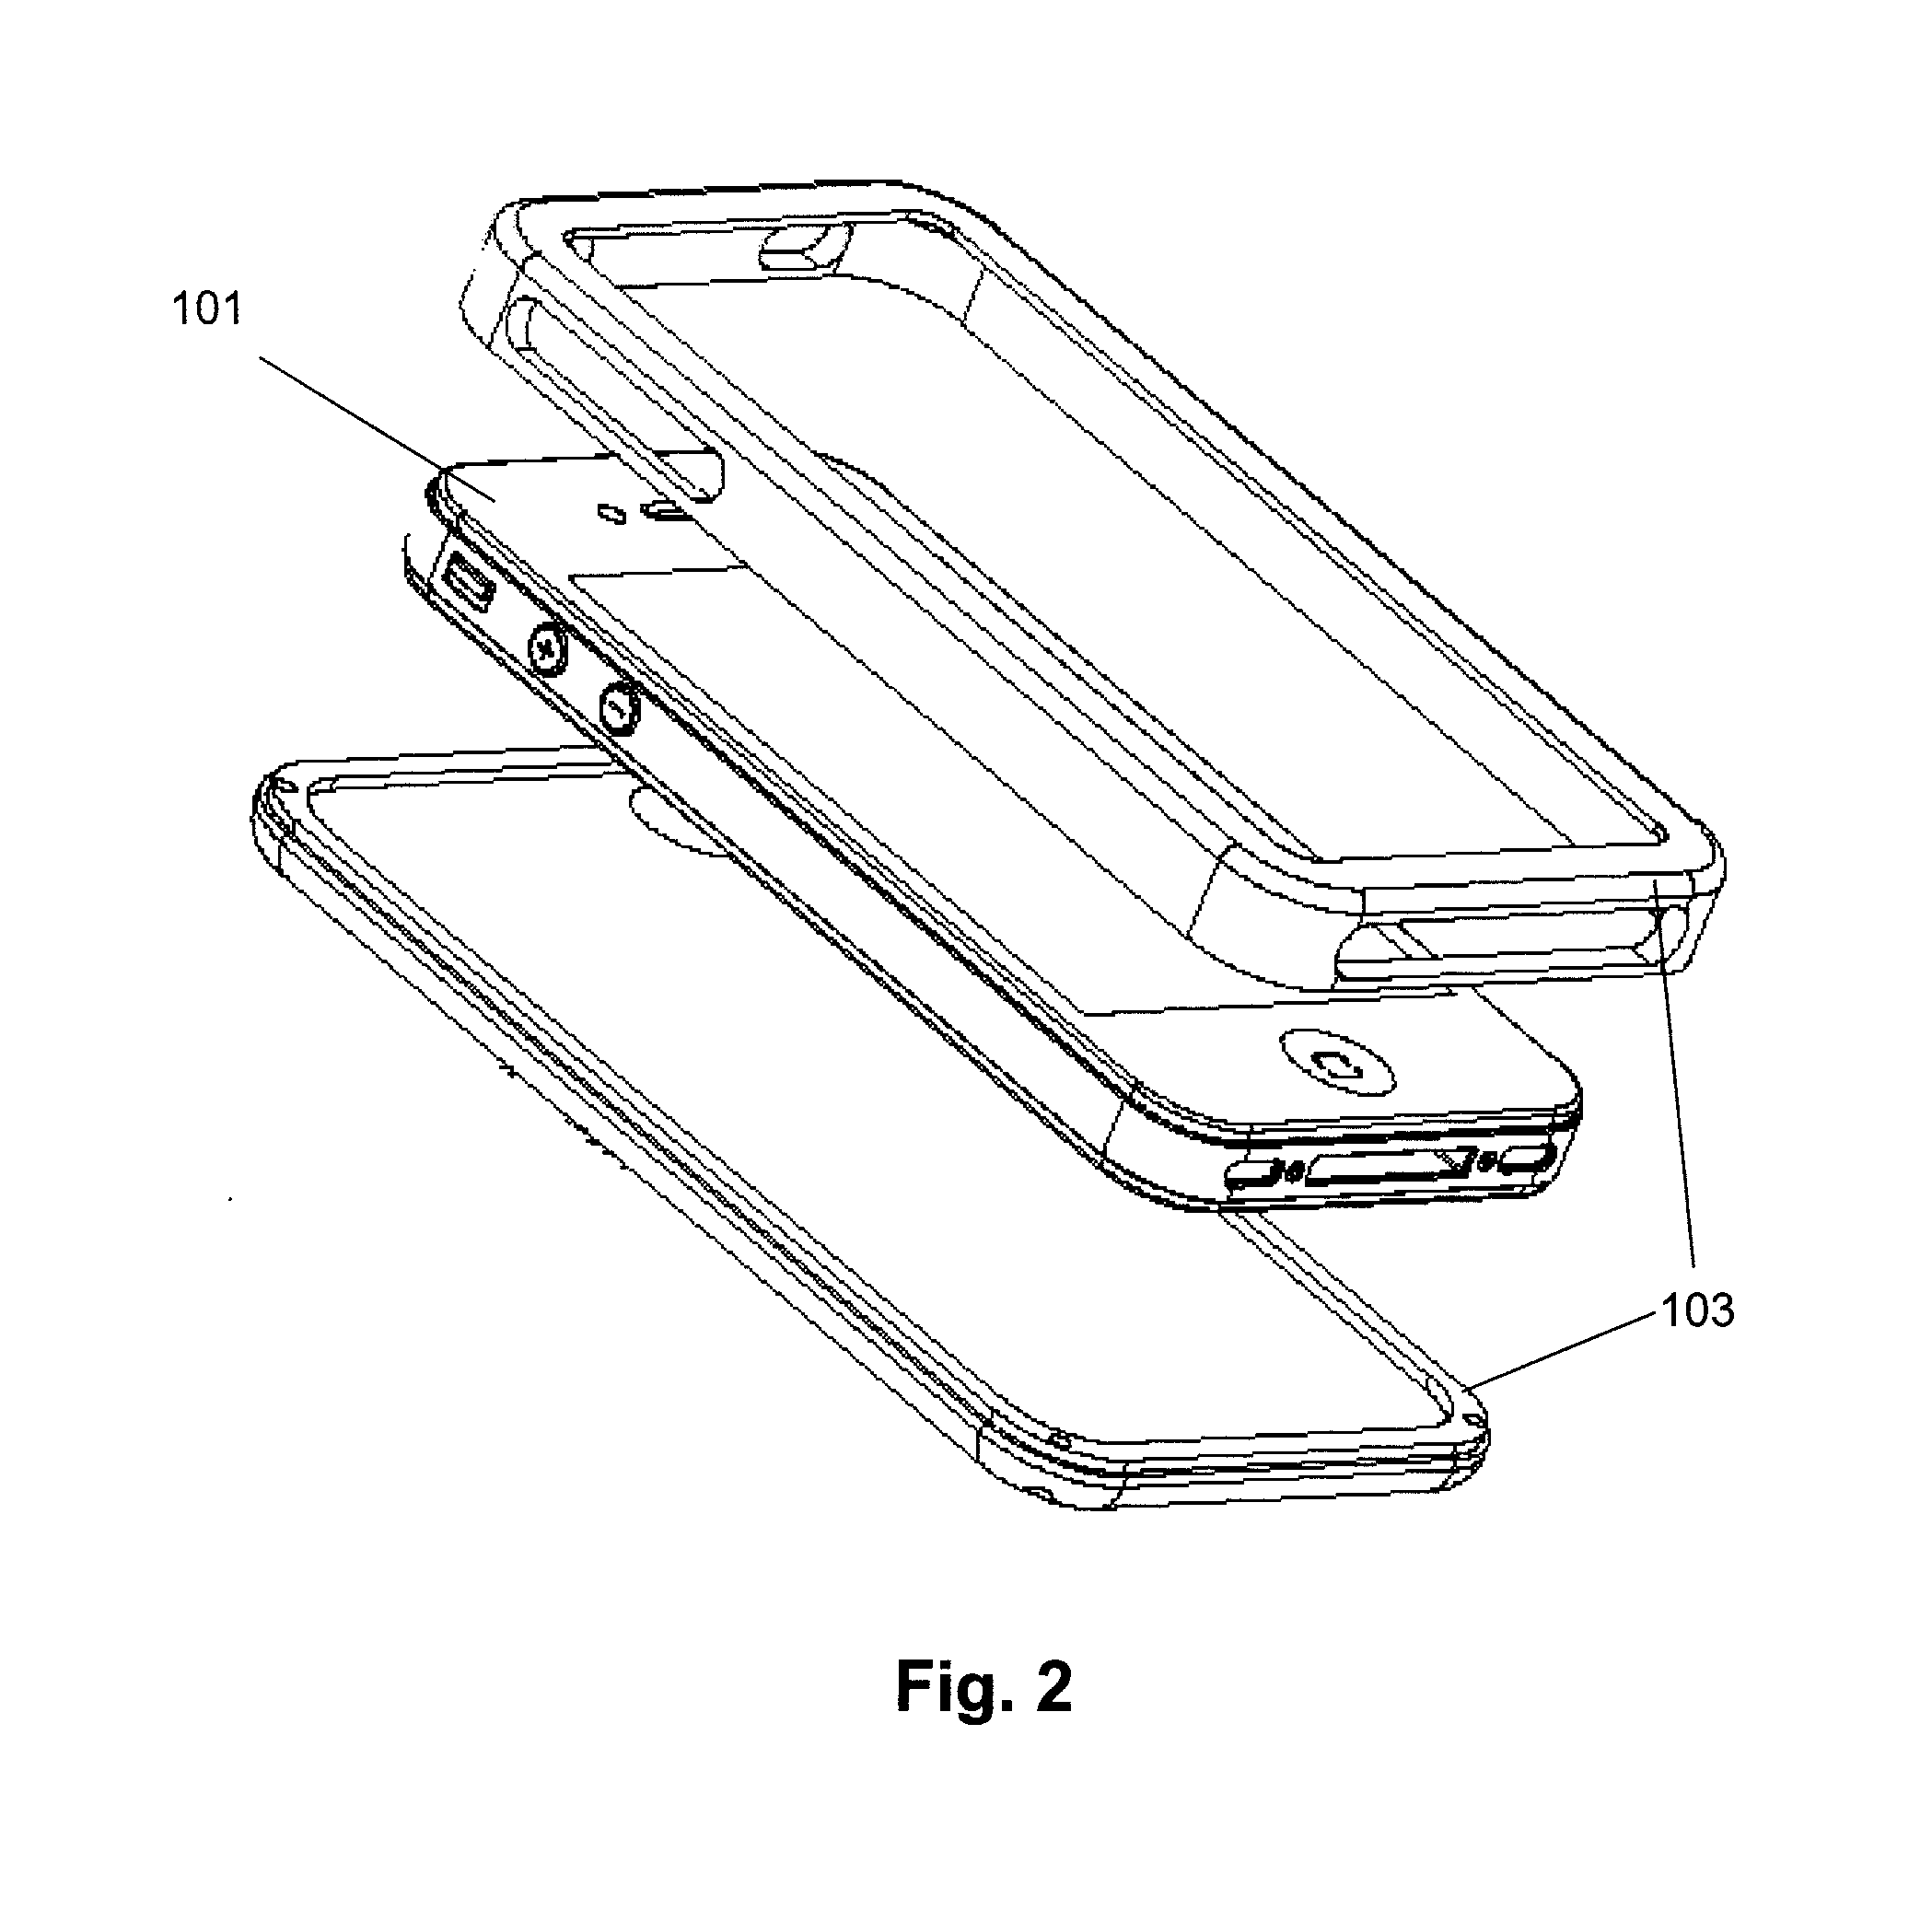 Biological Fluid Analysis System and Method